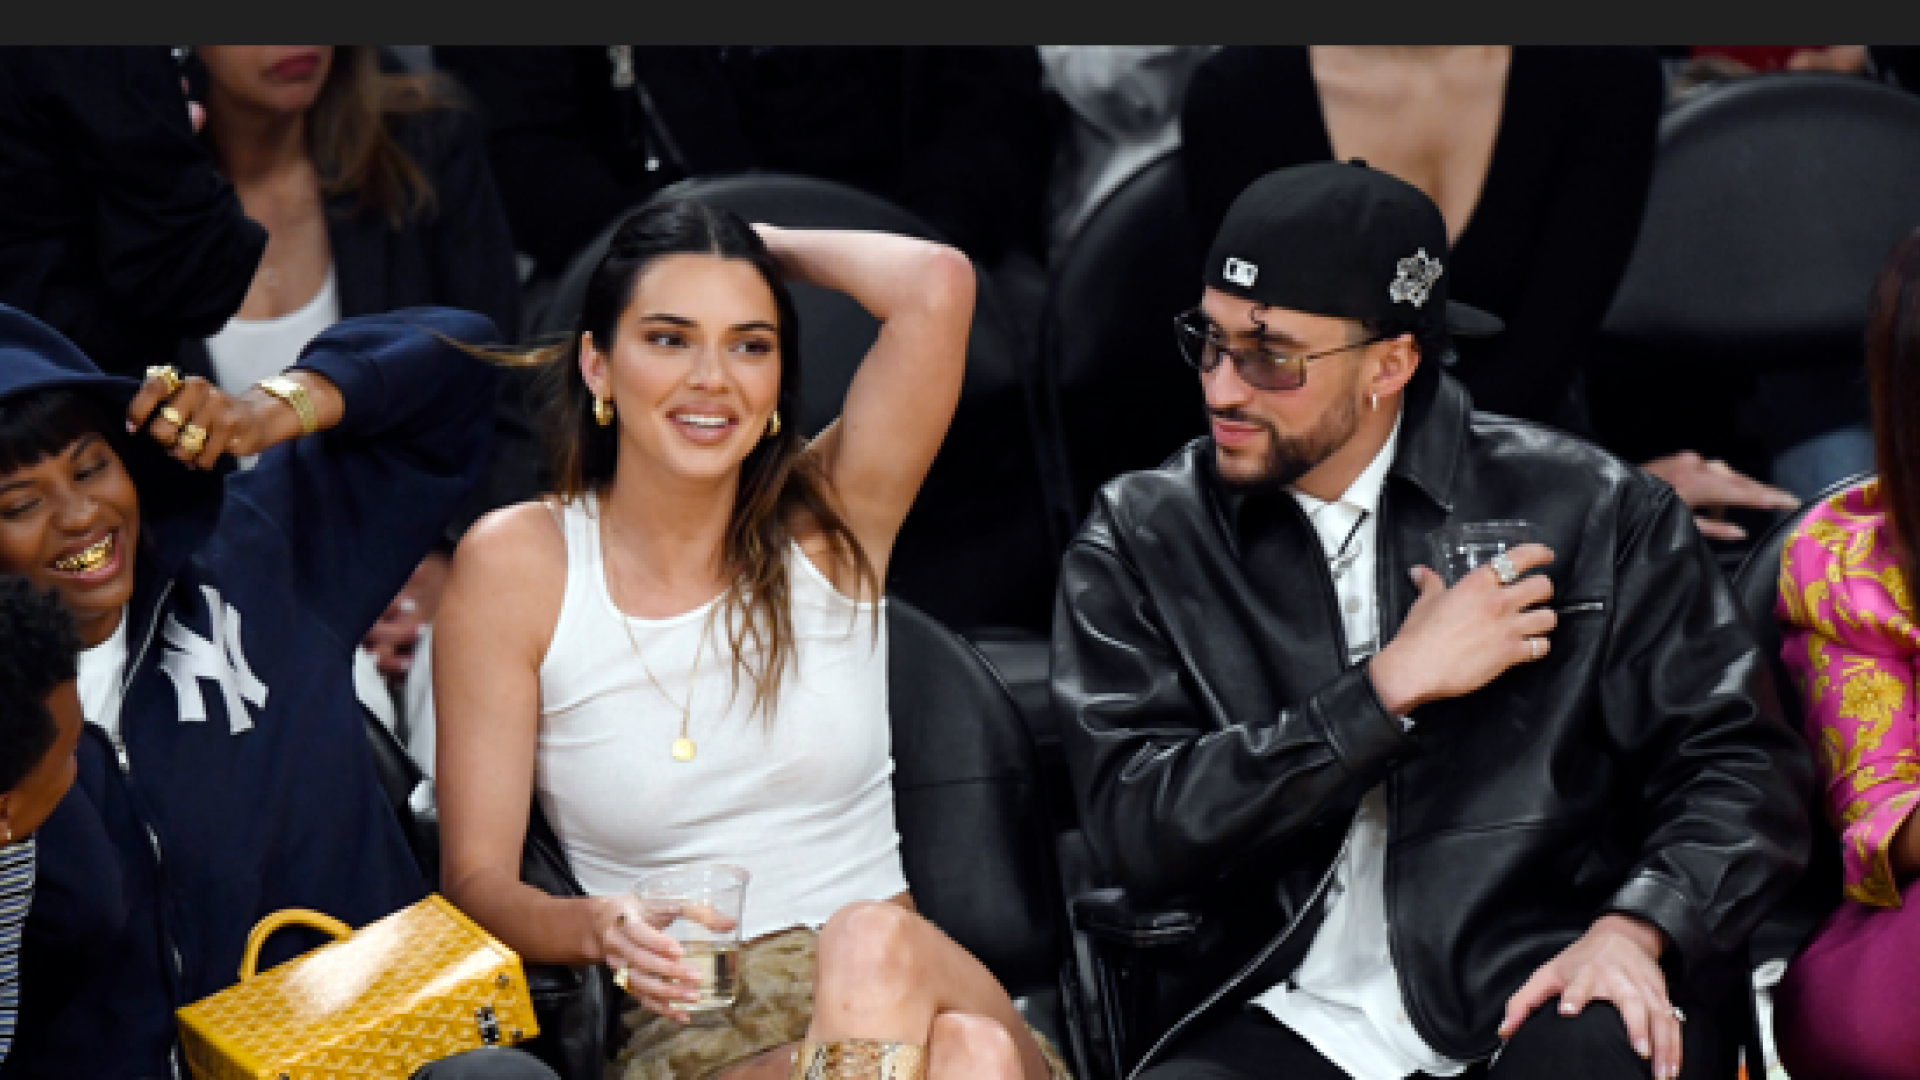 kendall jenner and bad bunny